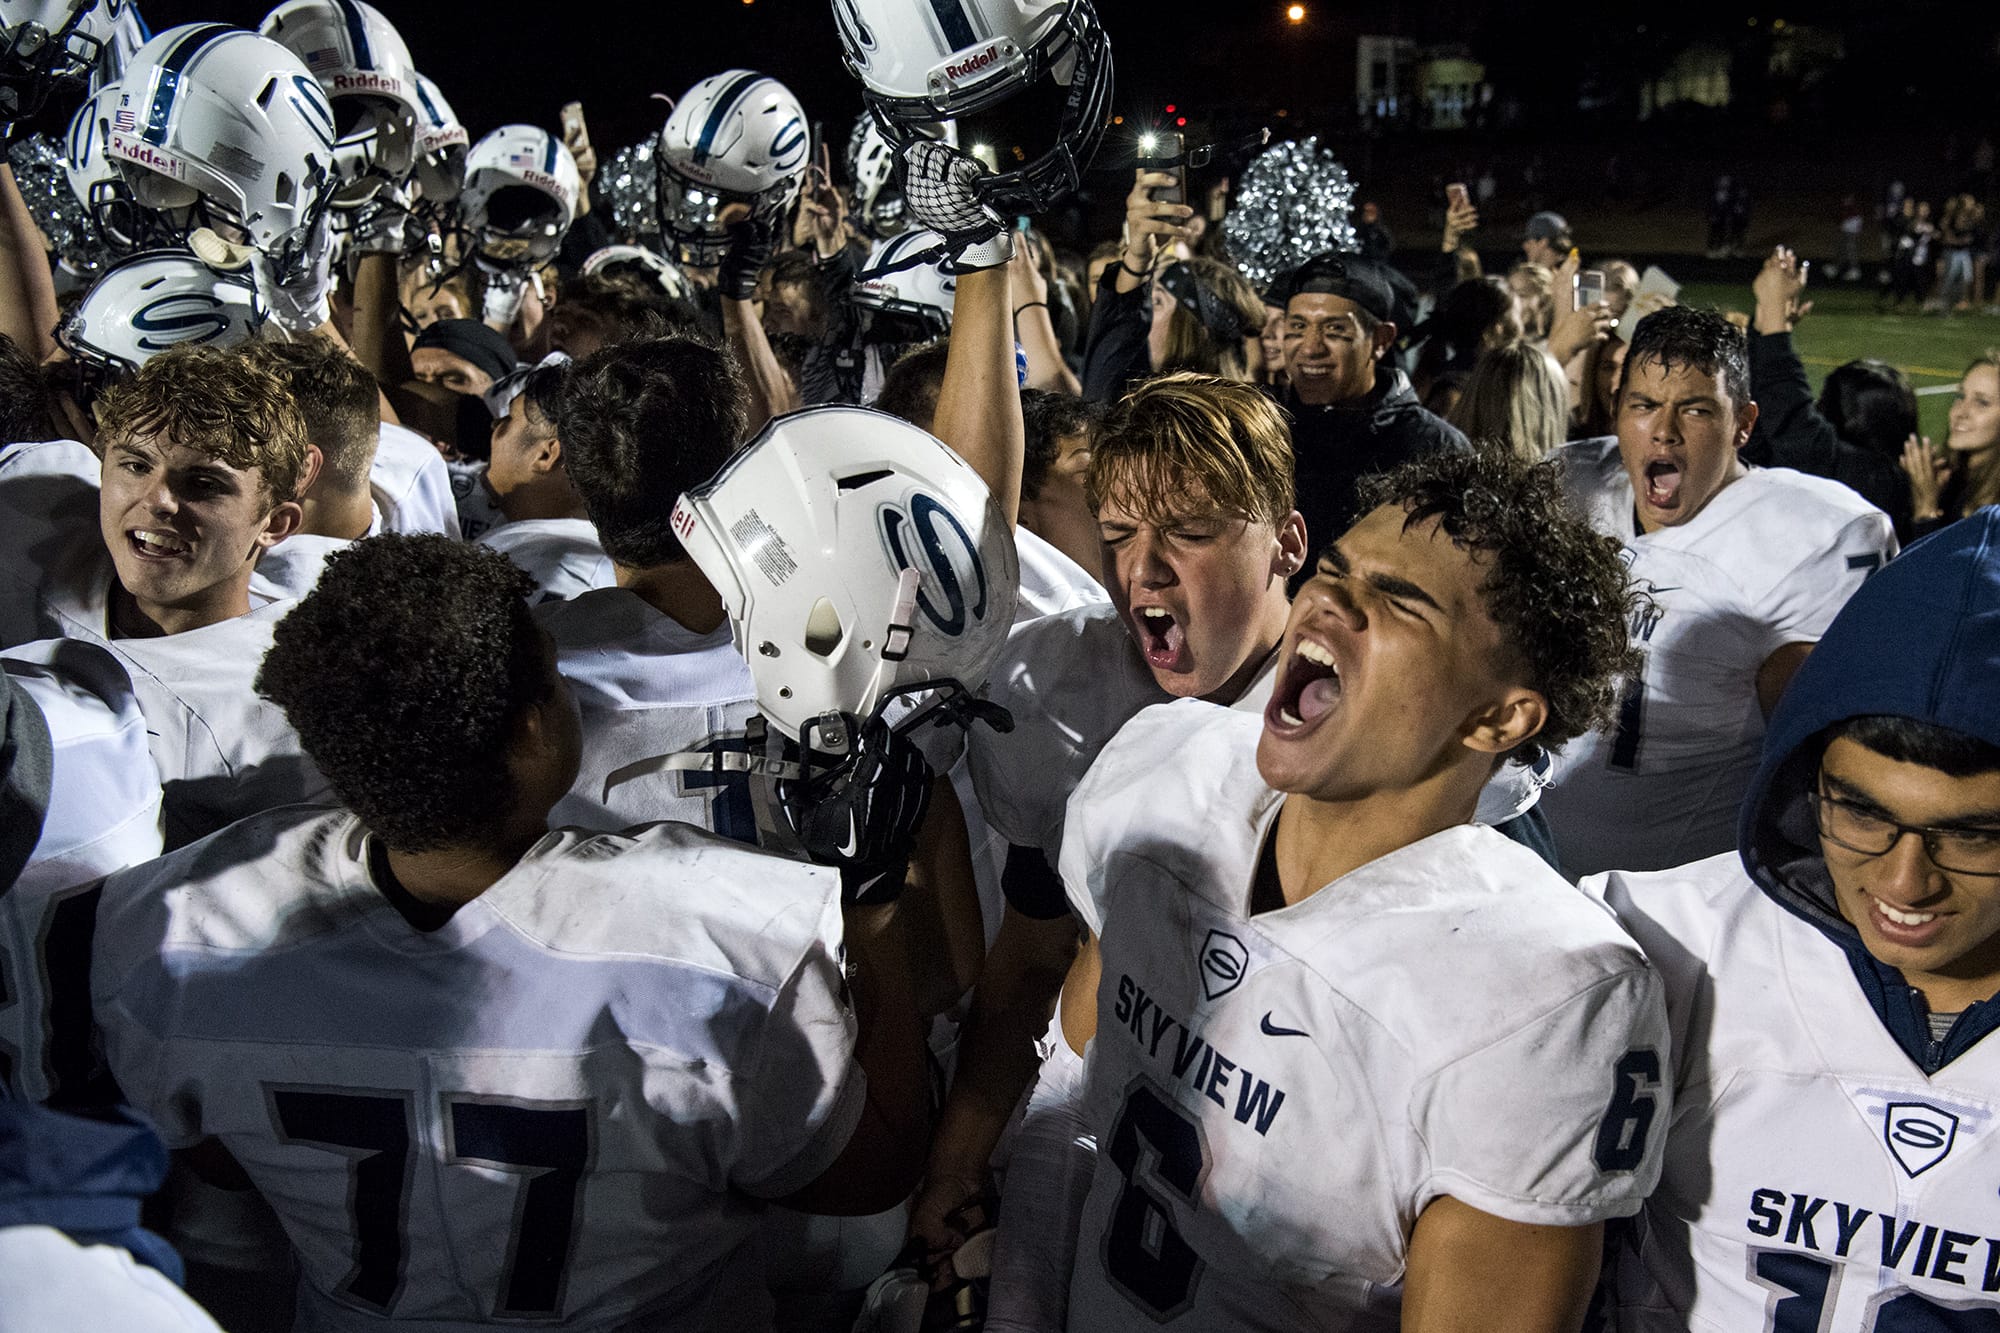 Skyview's Ahmani Williams (6) celebrates with his teammate after defeating Columbia River 34-6 in Friday night's game at Columbia River High School in Vancouver on Sept. 7, 2018.